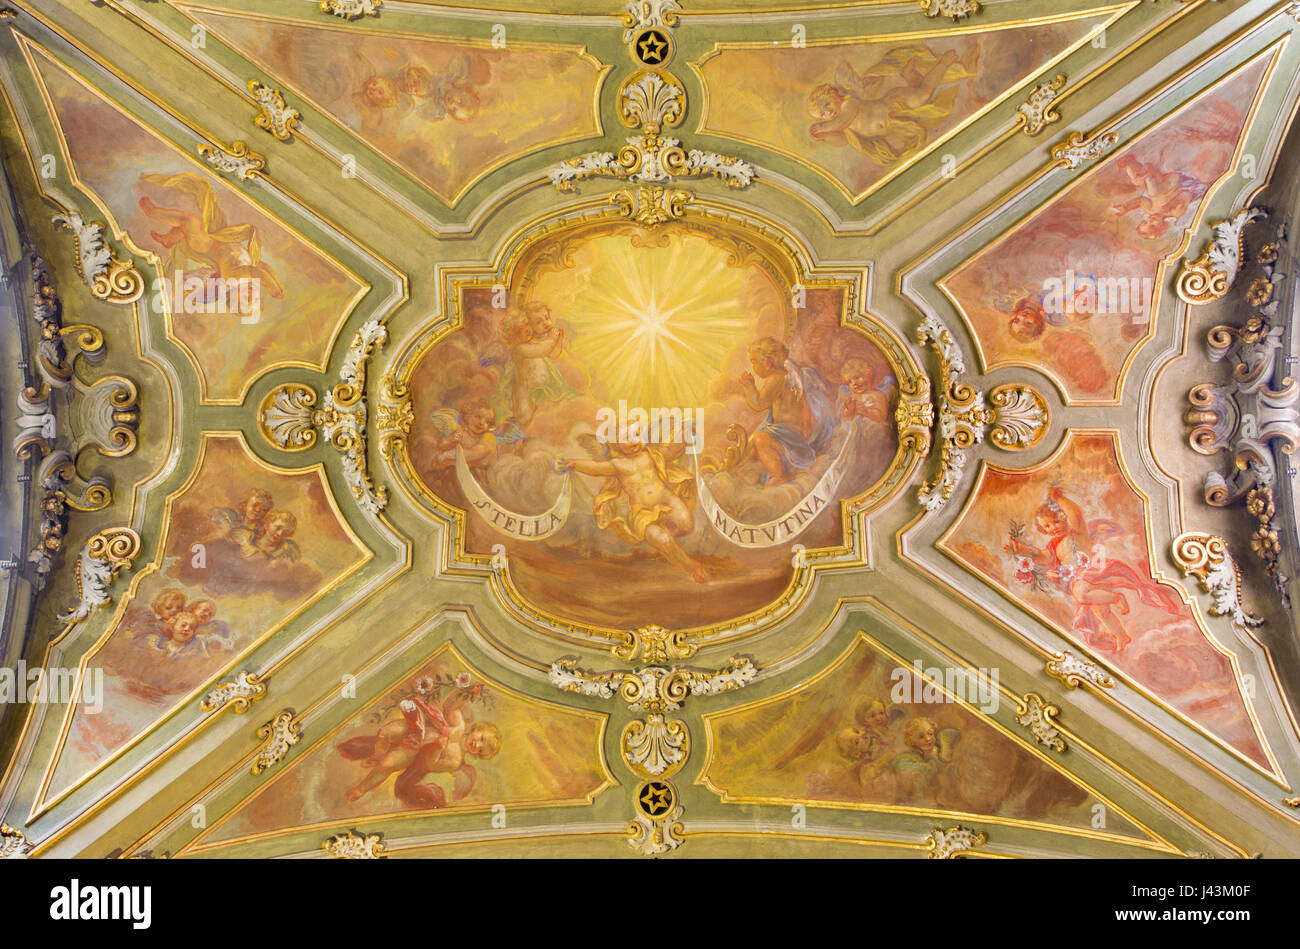 TURIN, ITALY - MARCH 14, 2017: The ceiling fresco of the angels with the marianic inscription of litany in church Chiesa di San Francesco. Stock Photo